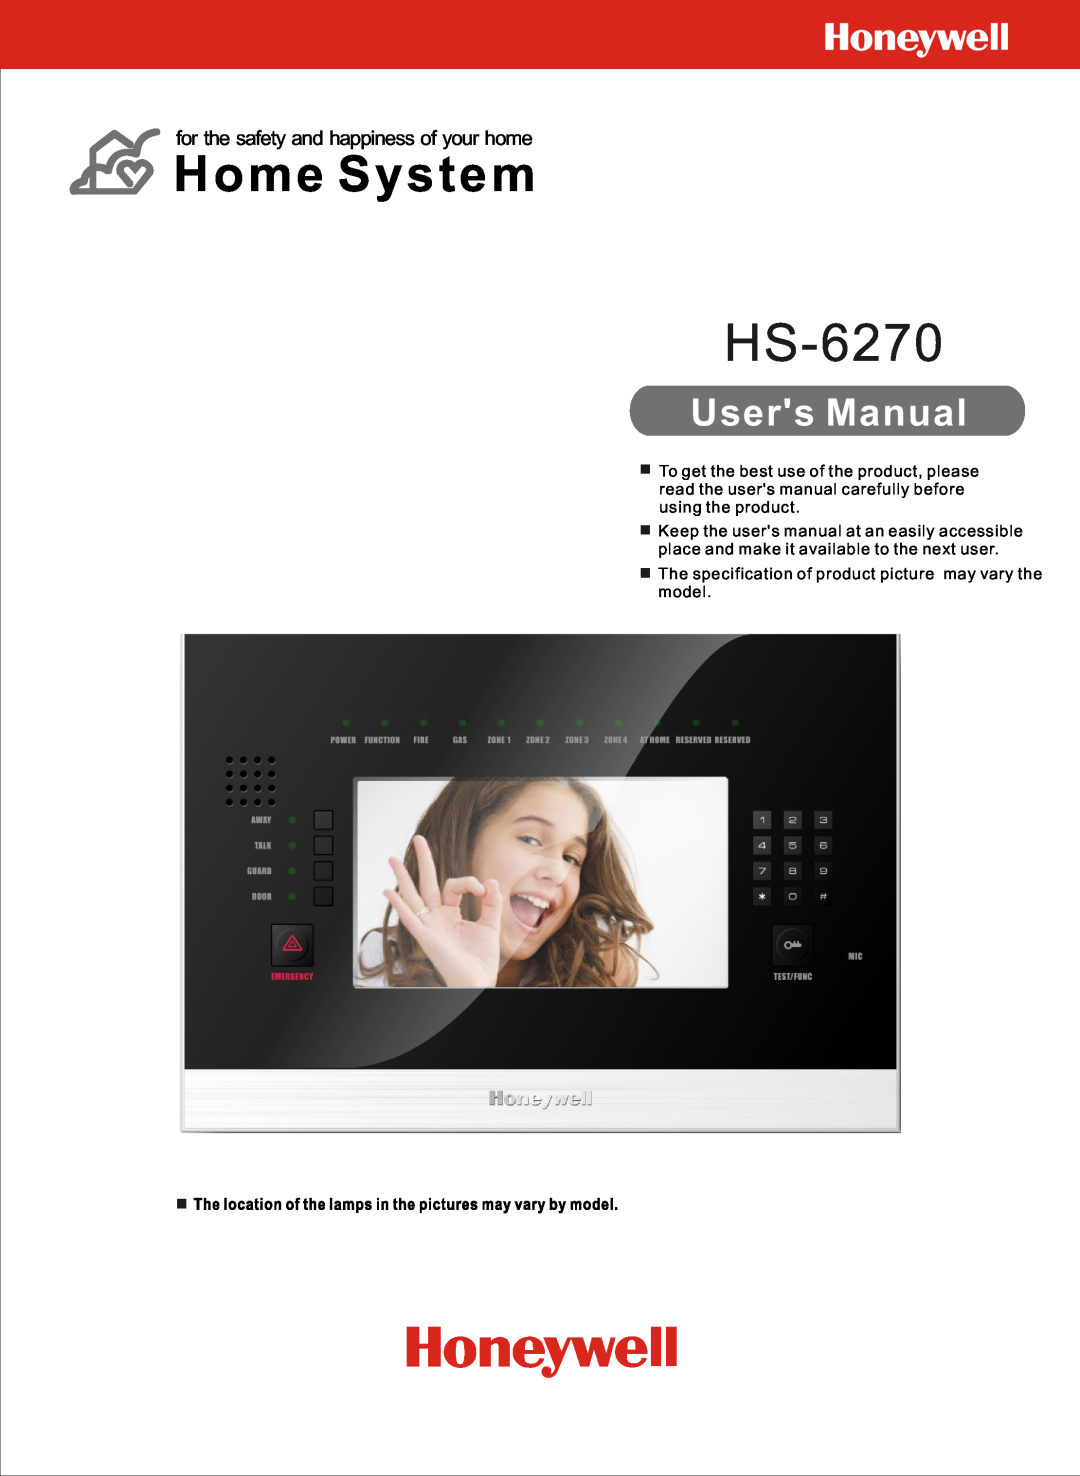 Honeywell HS-6270 user manual Home System, for the safety and happiness of your home 